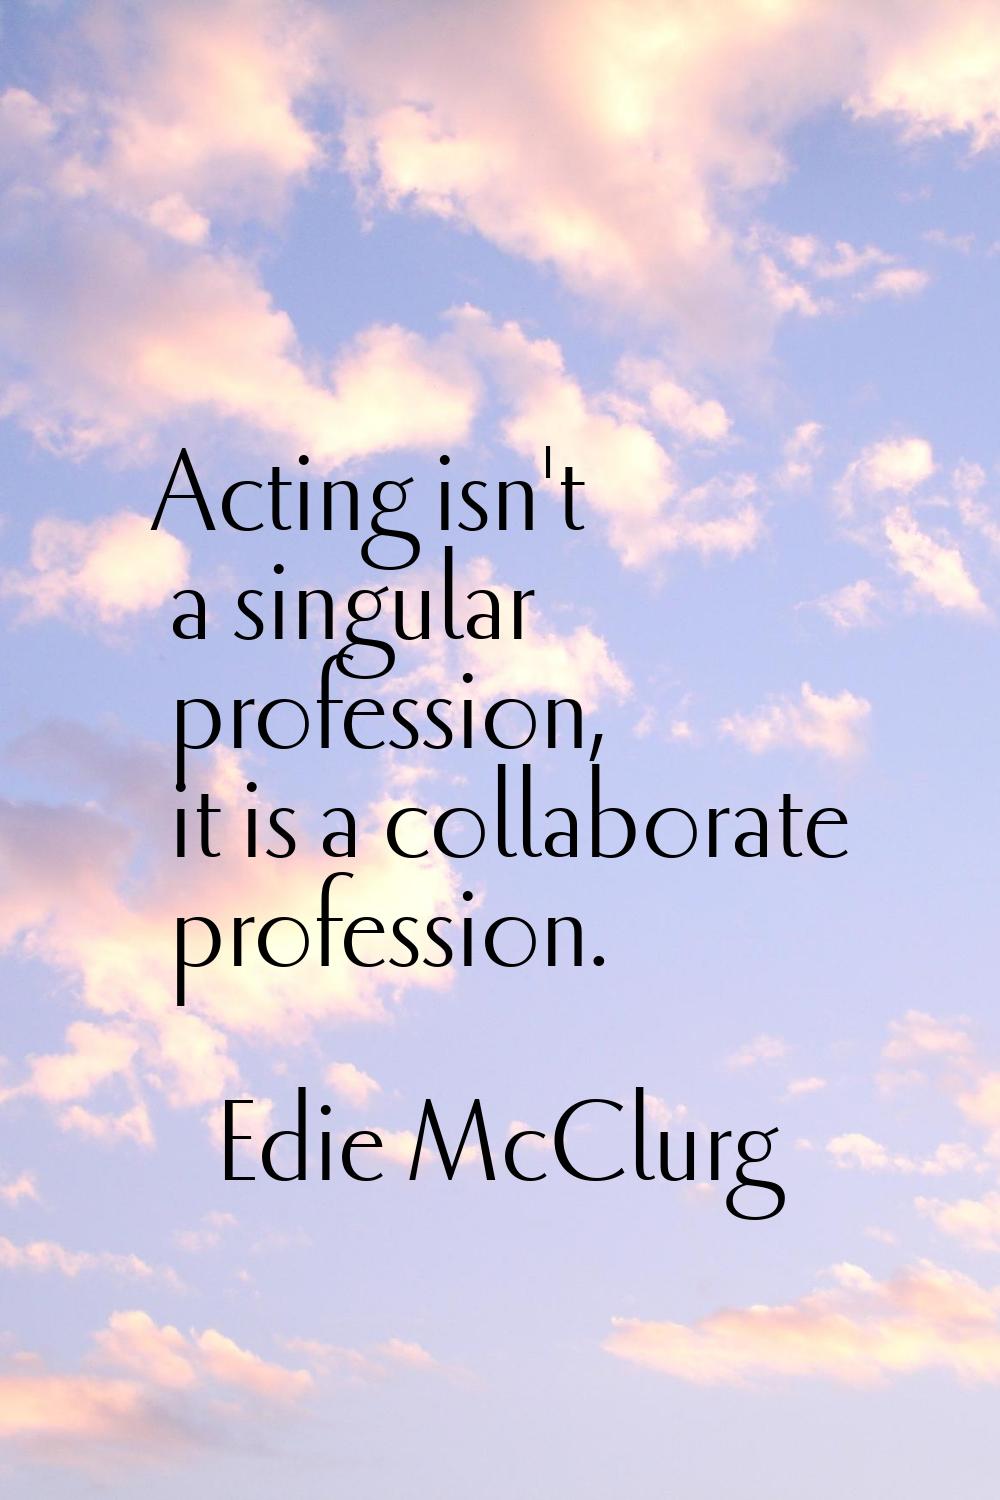 Acting isn't a singular profession, it is a collaborate profession.